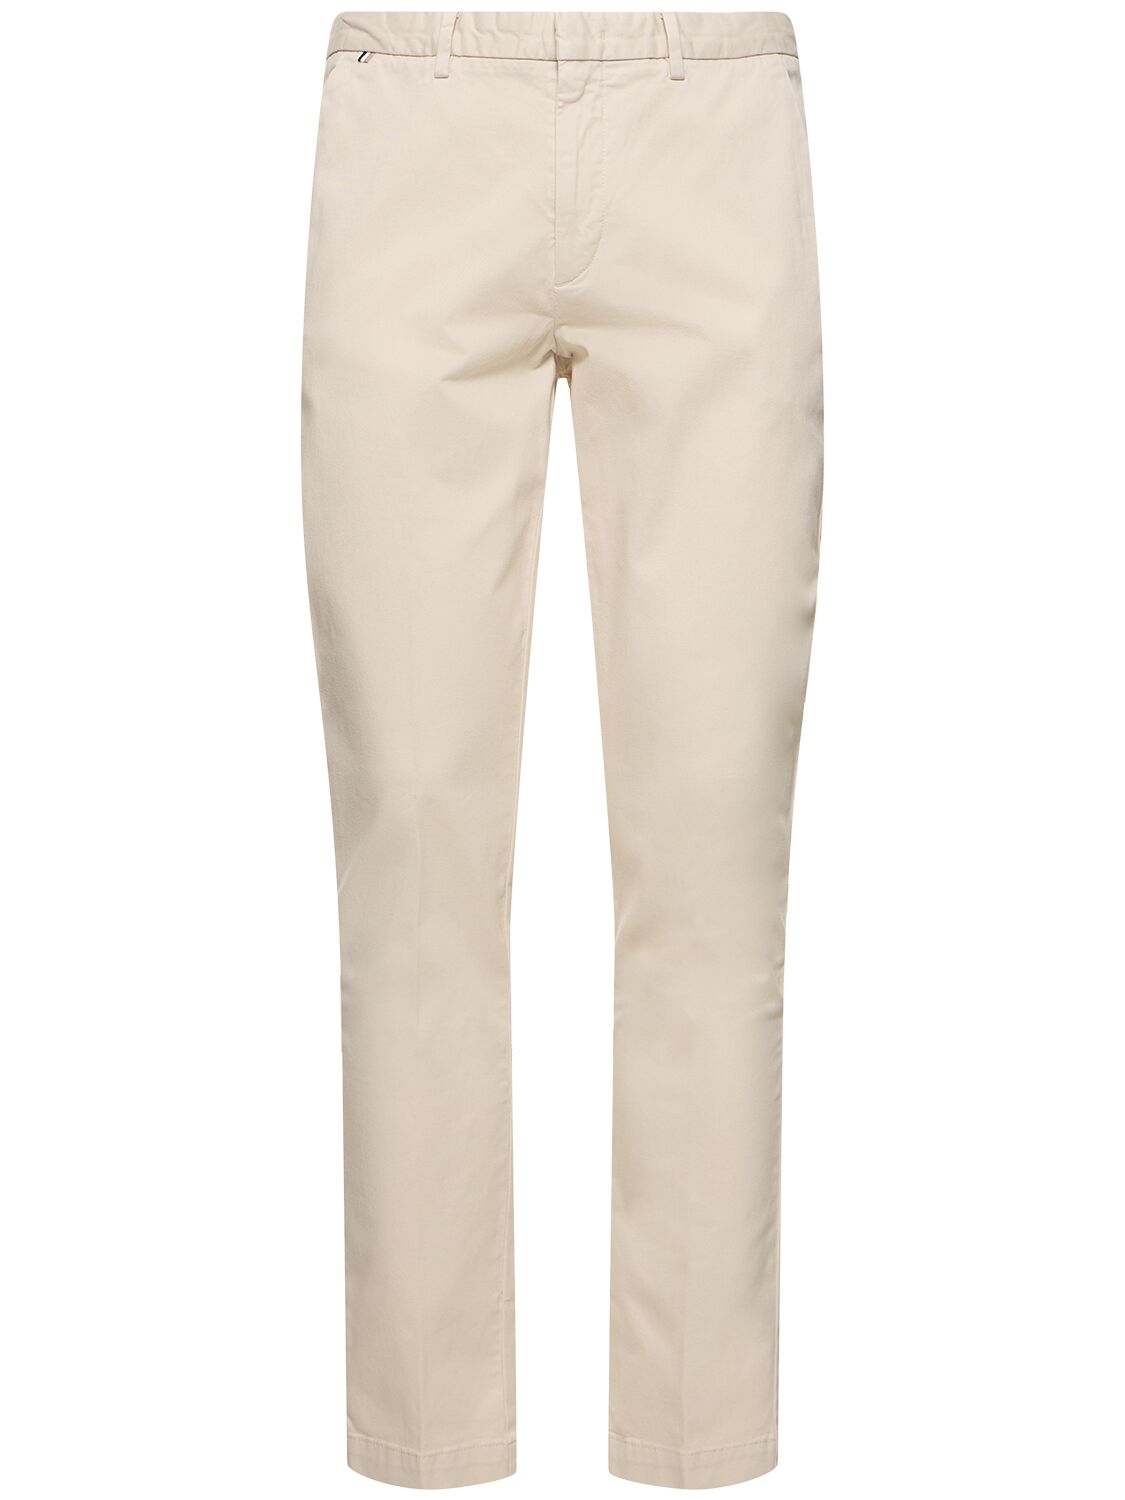 Image of Kaito Stretch Cotton Slim Fit Pants